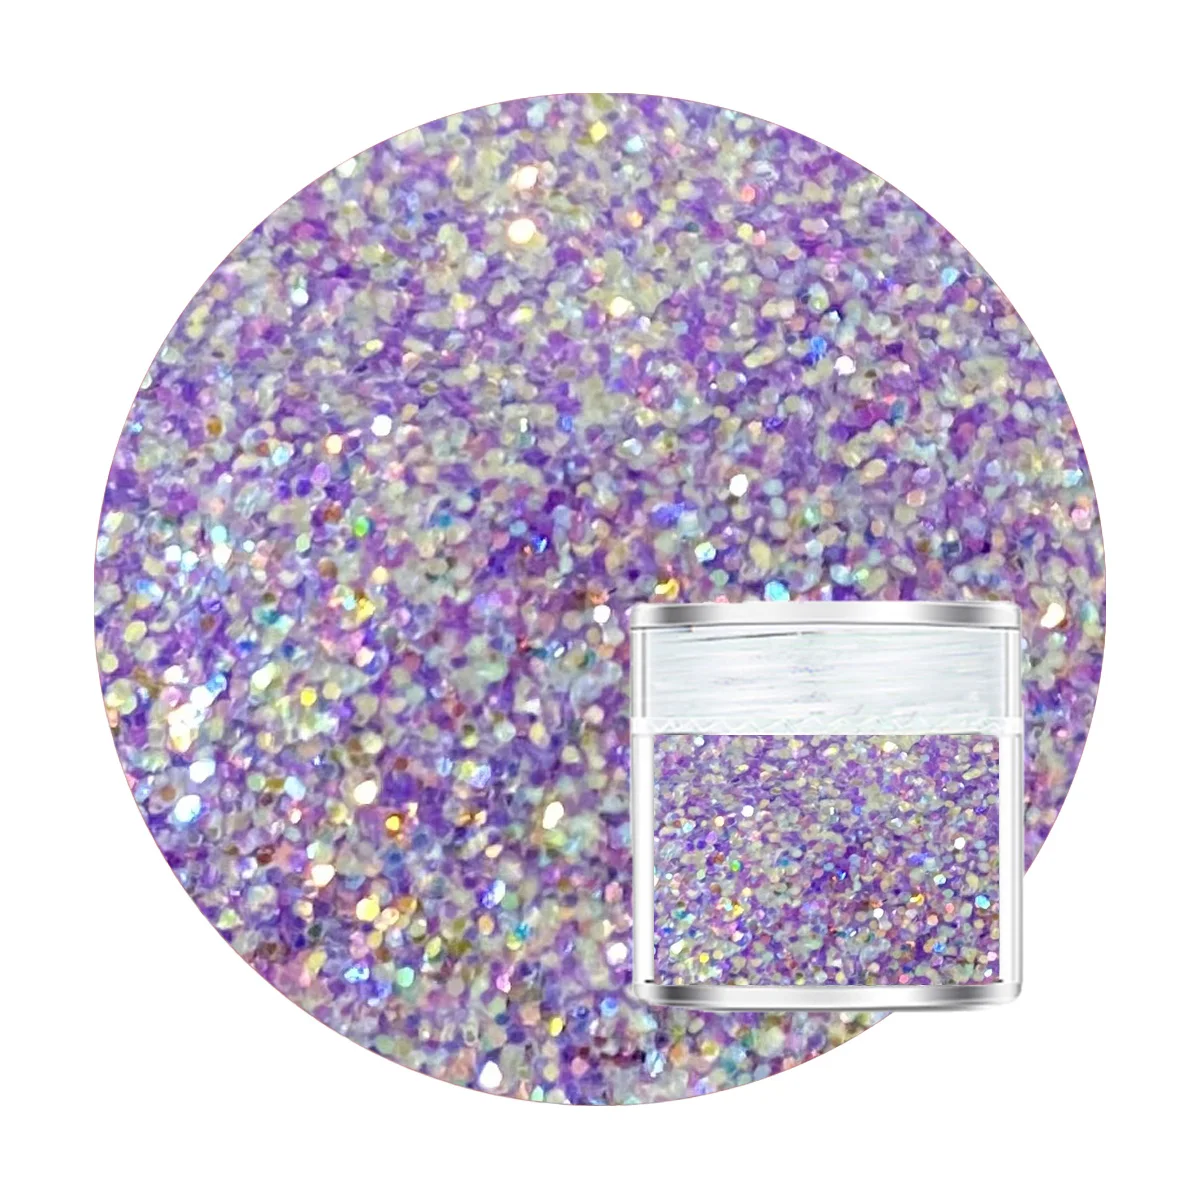 

20G/Bag Holographic Mixed Hexagon Chunky Nail Glitter Powder Sequins Sparkly Flakes Slices Manicure Body/Eye/Face Decoration